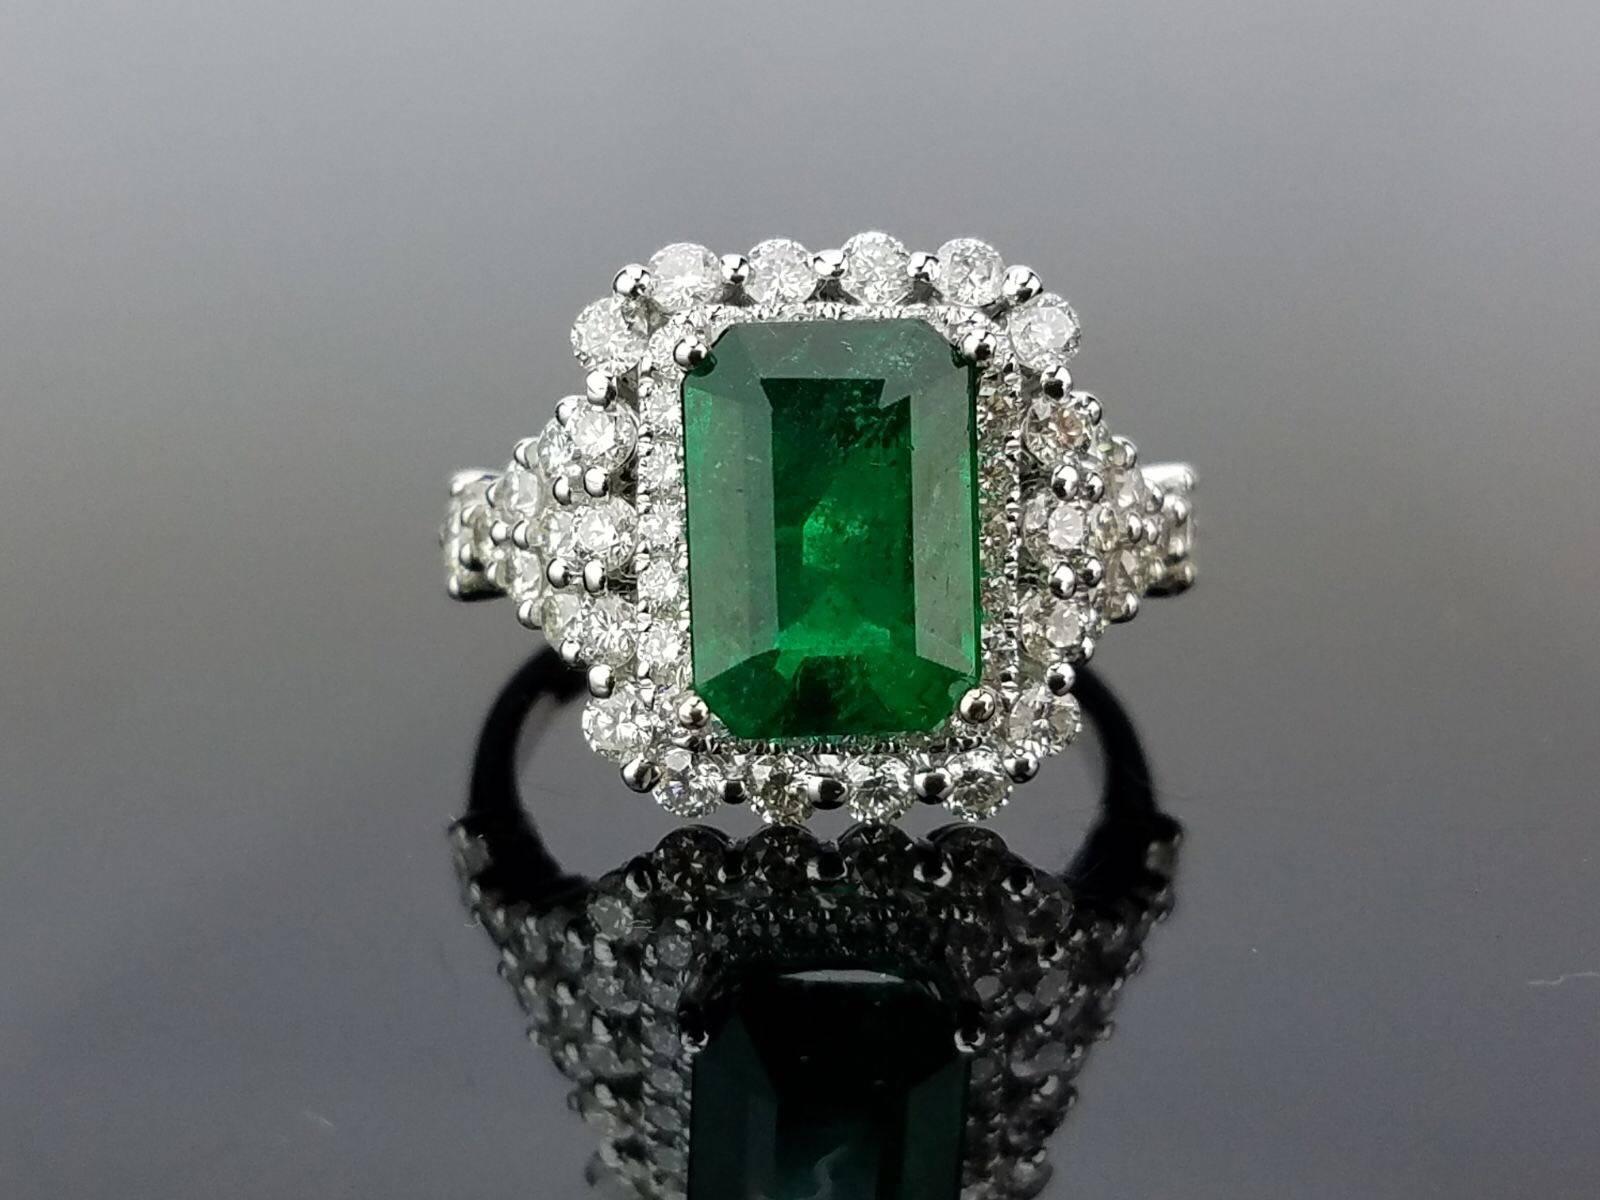 A beautifully created cocktail ring, using white diamonds and fine quality emerald all set in 18K white gold. 

Stone Details: 
Stone: Emerald
Carat Weight: 2.97 Carat

Diamond Details:
Total Carat Weight: 1.365 carat
Quality: VS/SI , H/I

18K Gold: